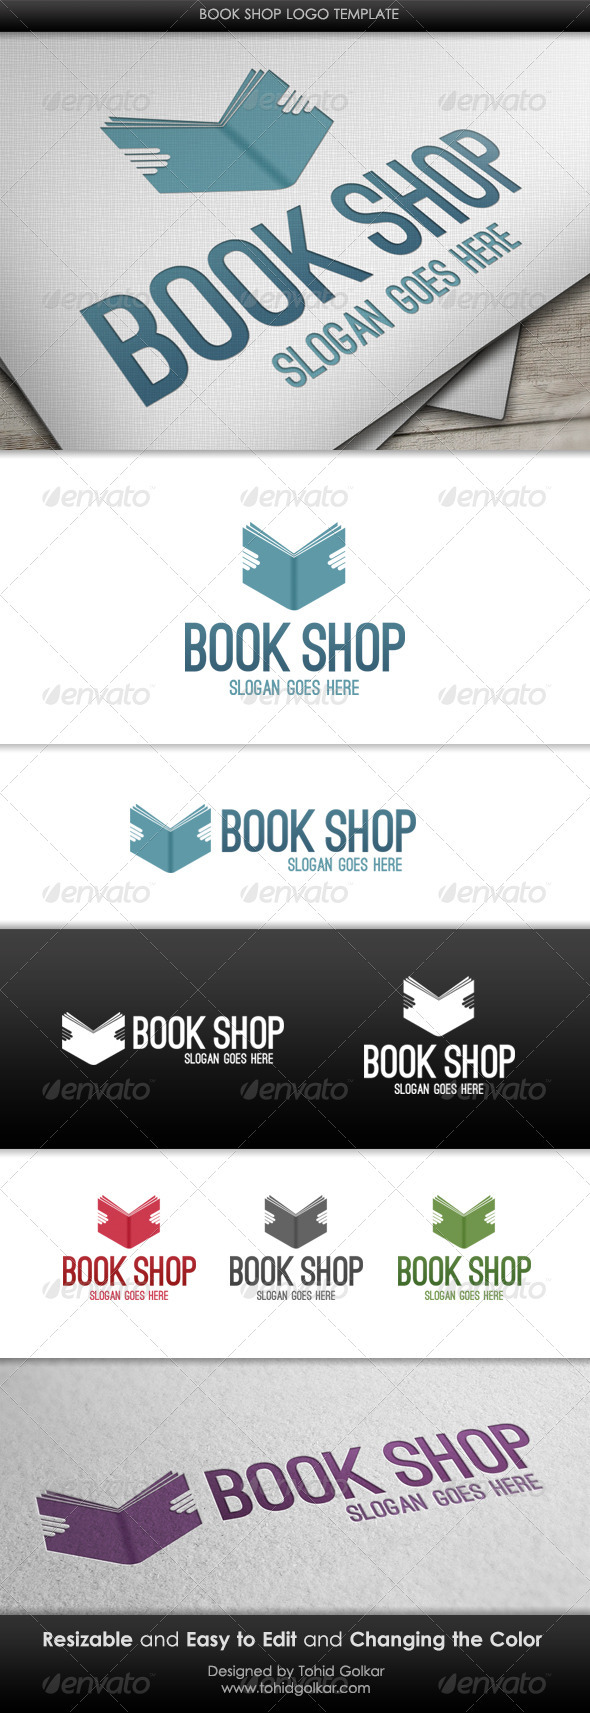 Signing In Book Template